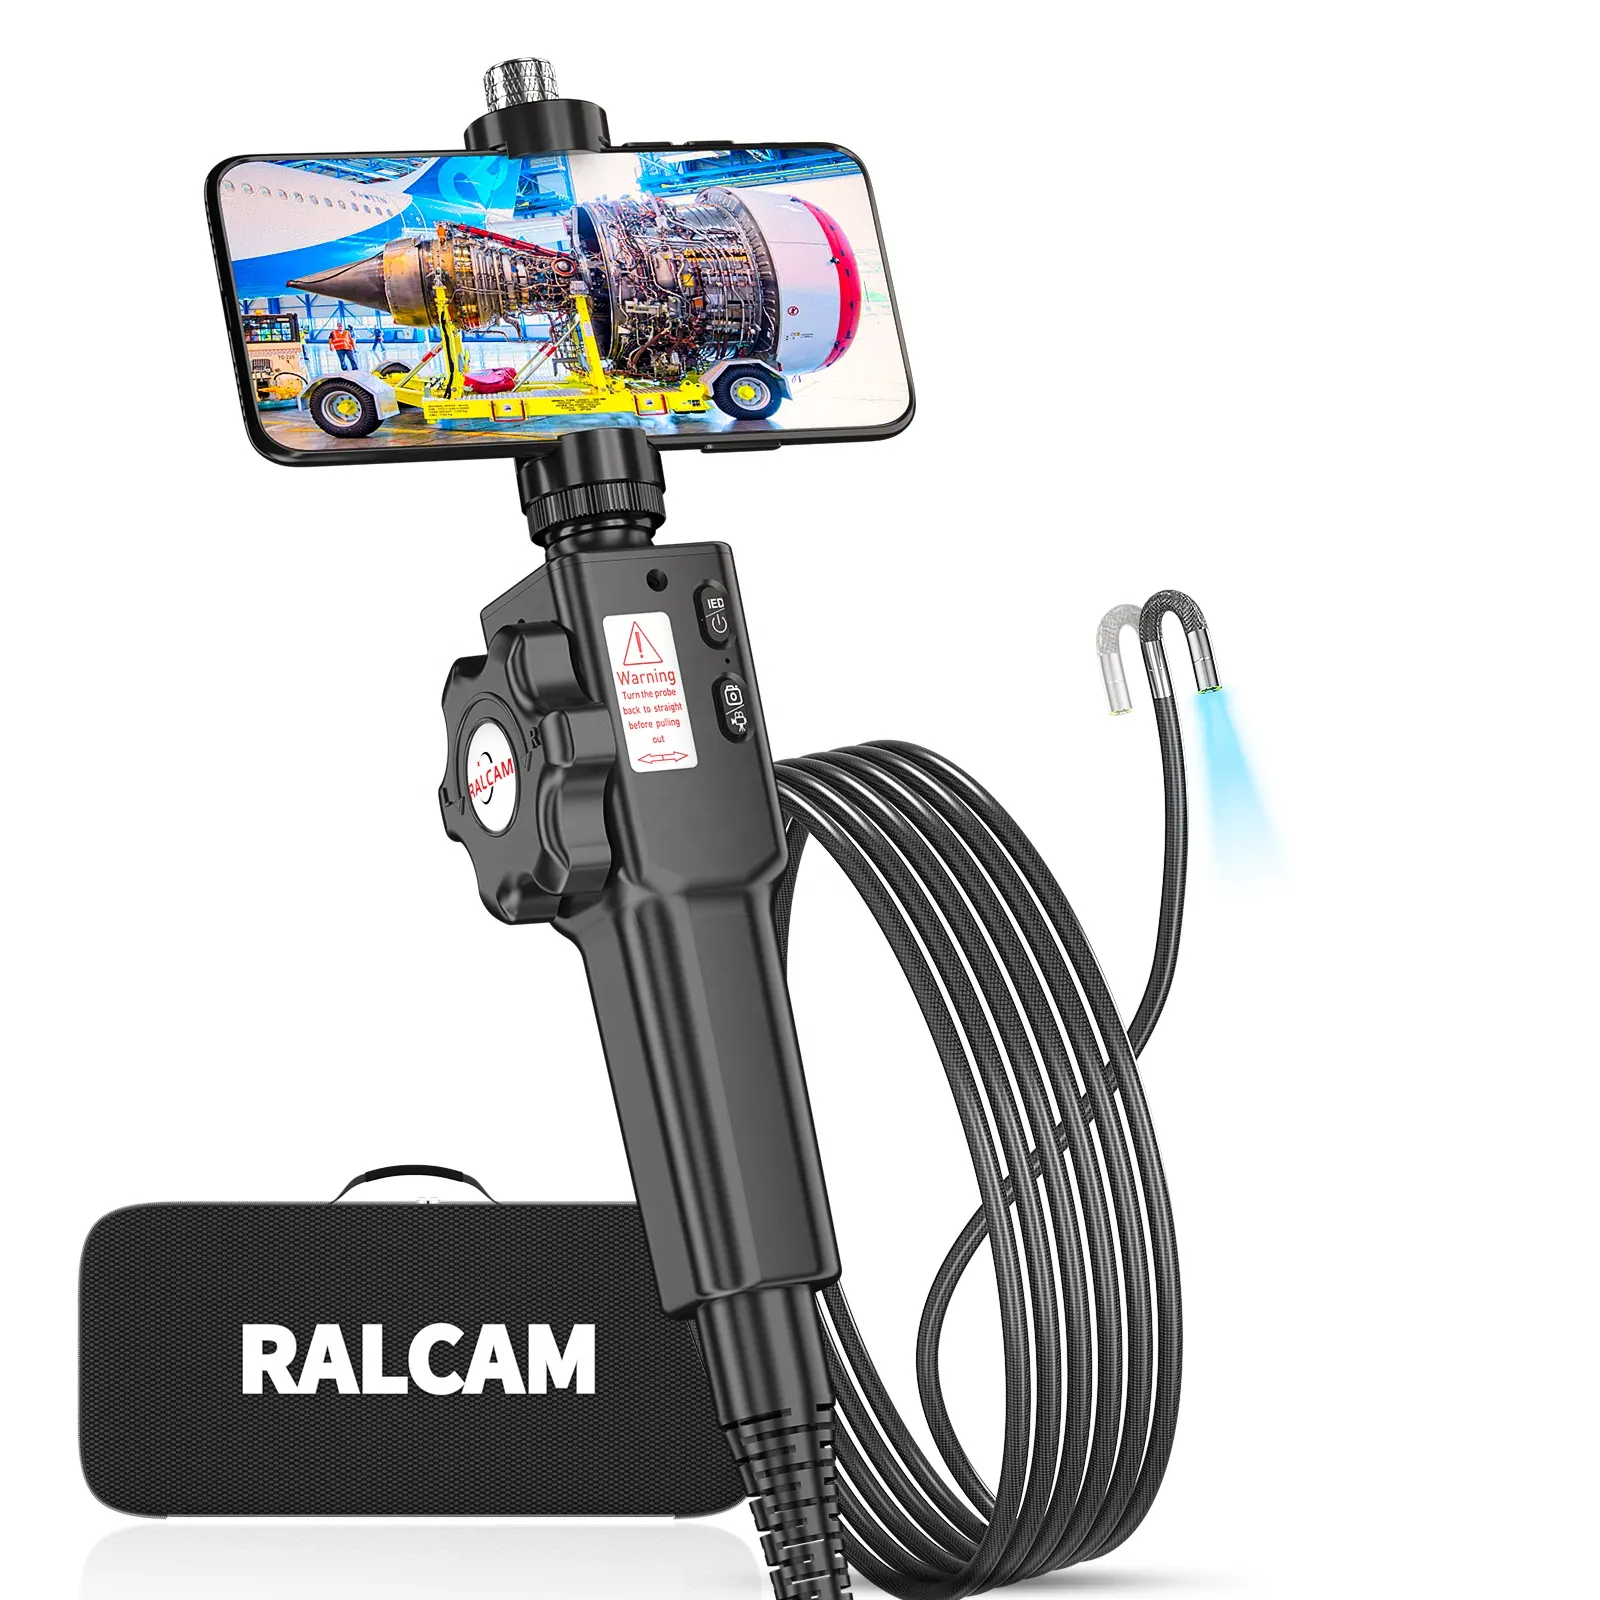 Ralcam Global Hot Sale 6.2mm IP67 Flexible Endoscope Support All Cellphone Articulating Borescope For Inspection